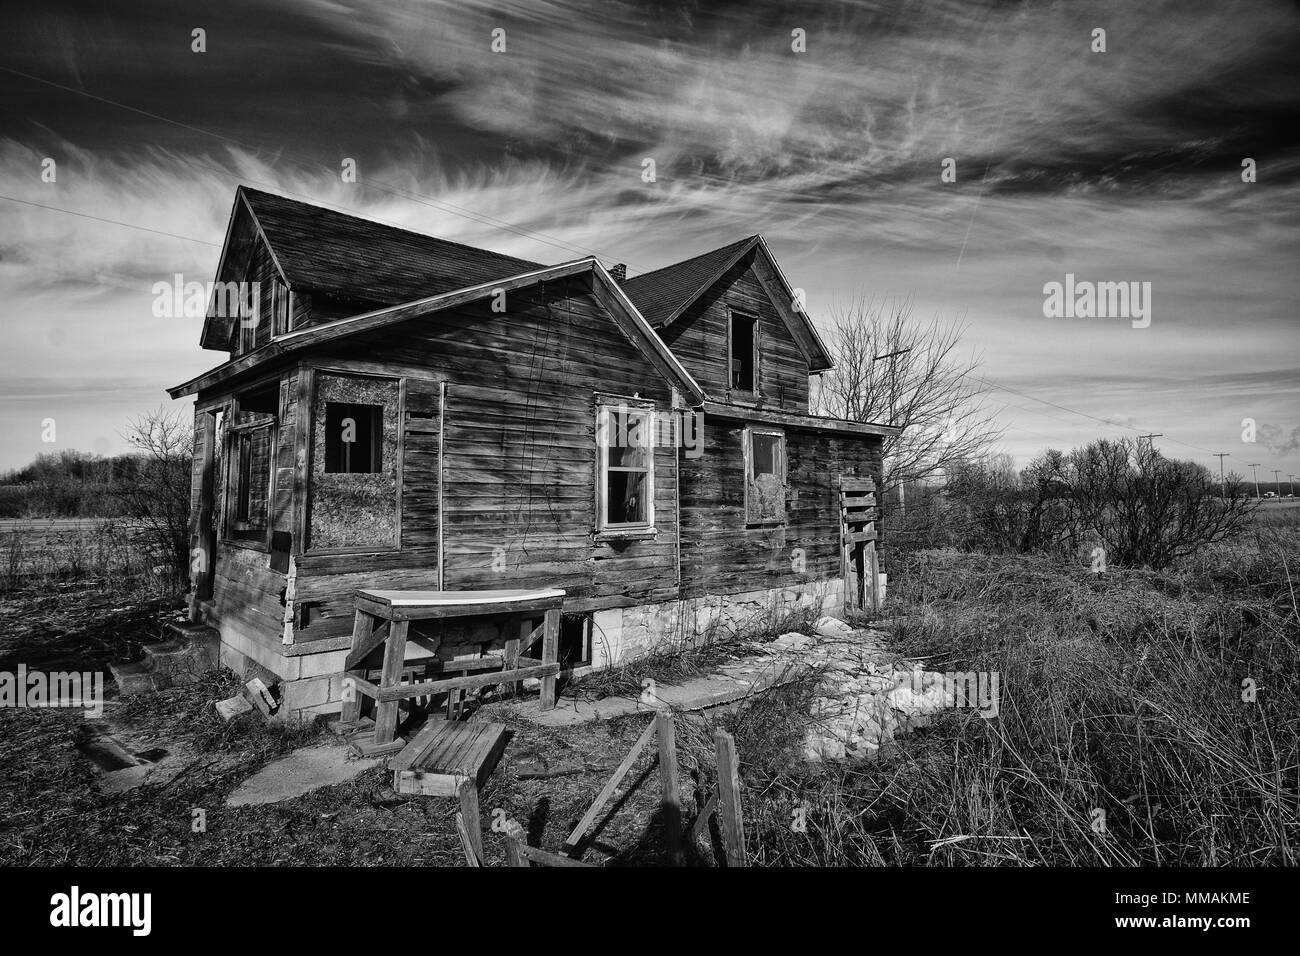 Black and white photo of an old scary abandoned farm house that is deteriorating with time and neglect. Stock Photo